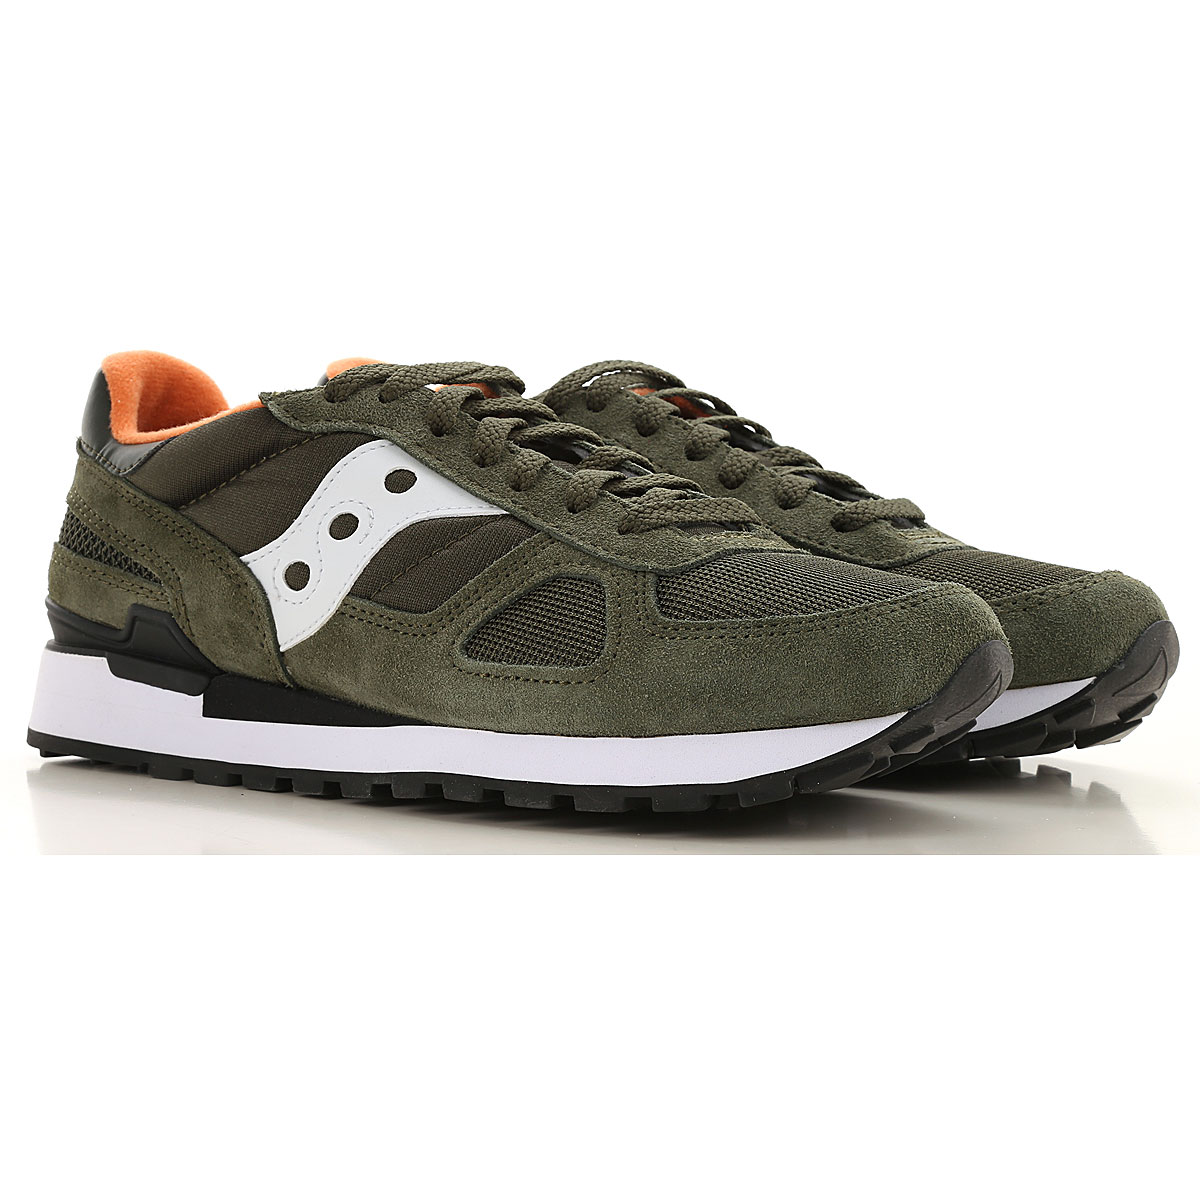 Mens Shoes Saucony, Style code: 2108-534-